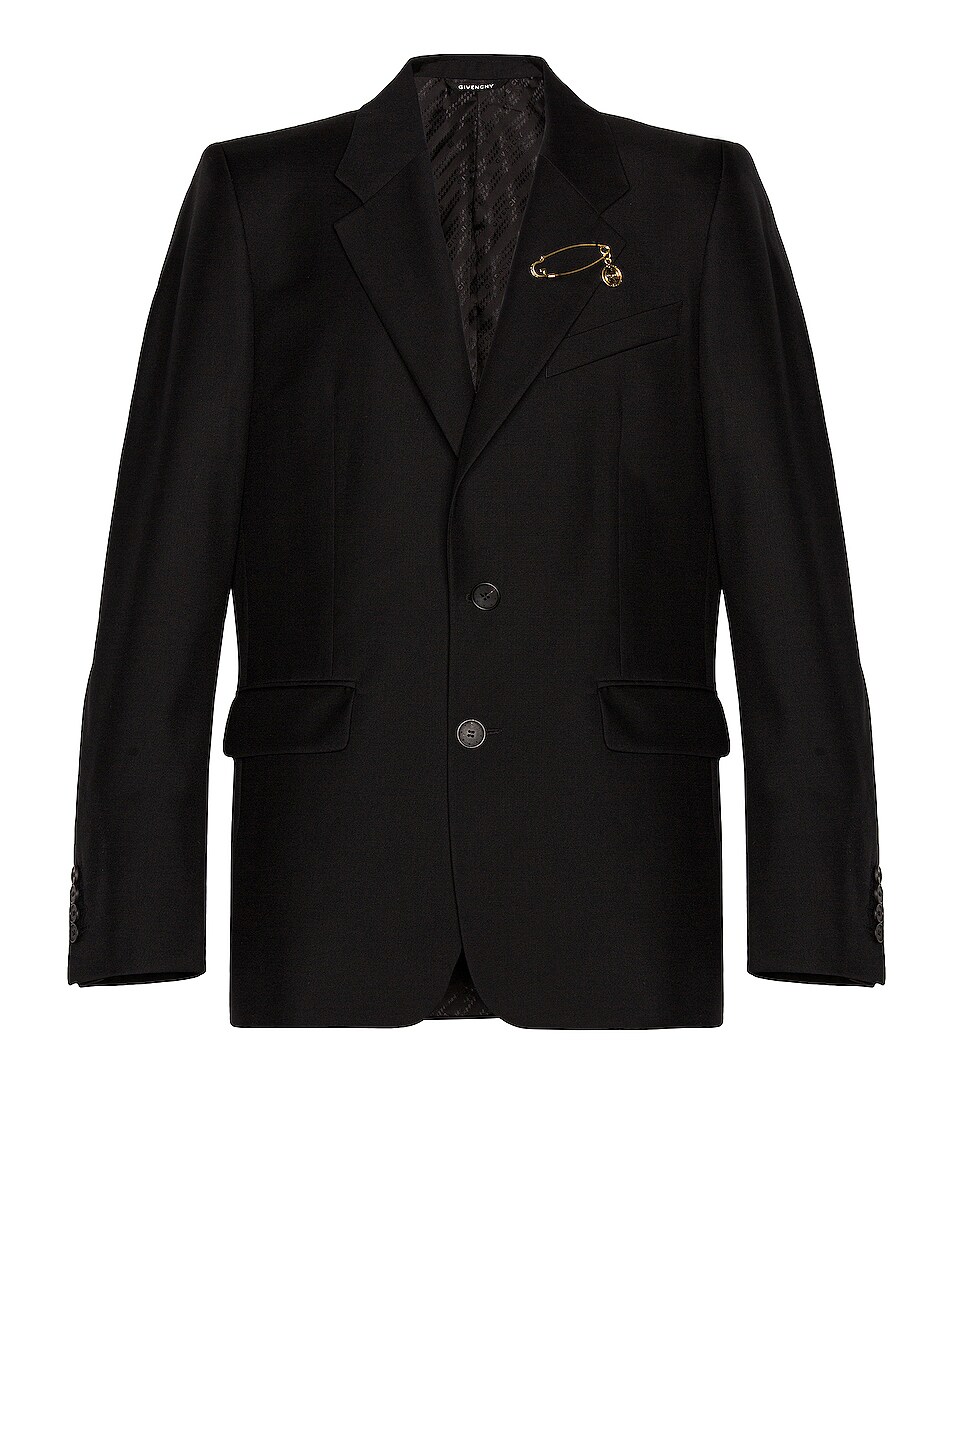 Givenchy 2 Button Notch Lapel Jacket with Pin in Black | FWRD